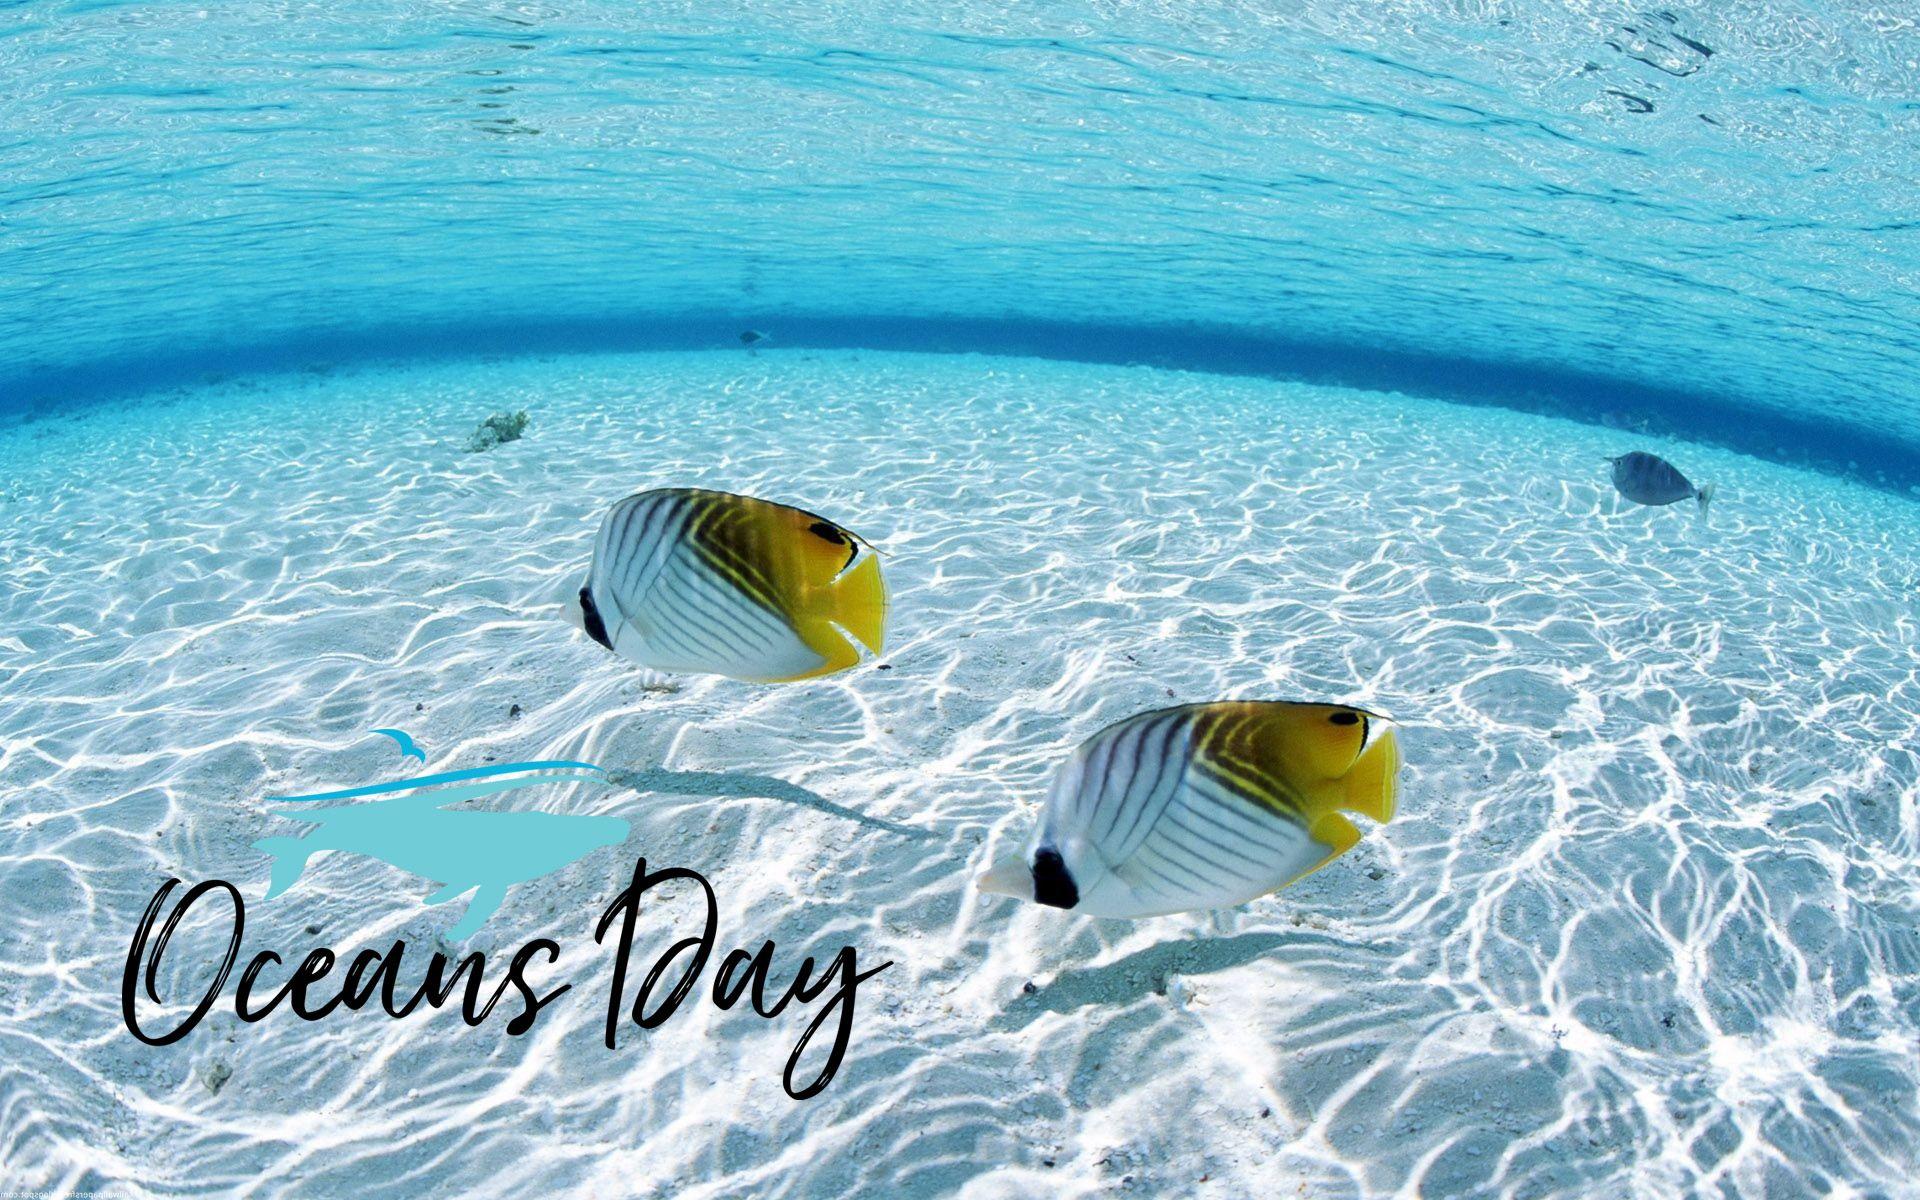 World Oceans Day Wallpaper Free Download